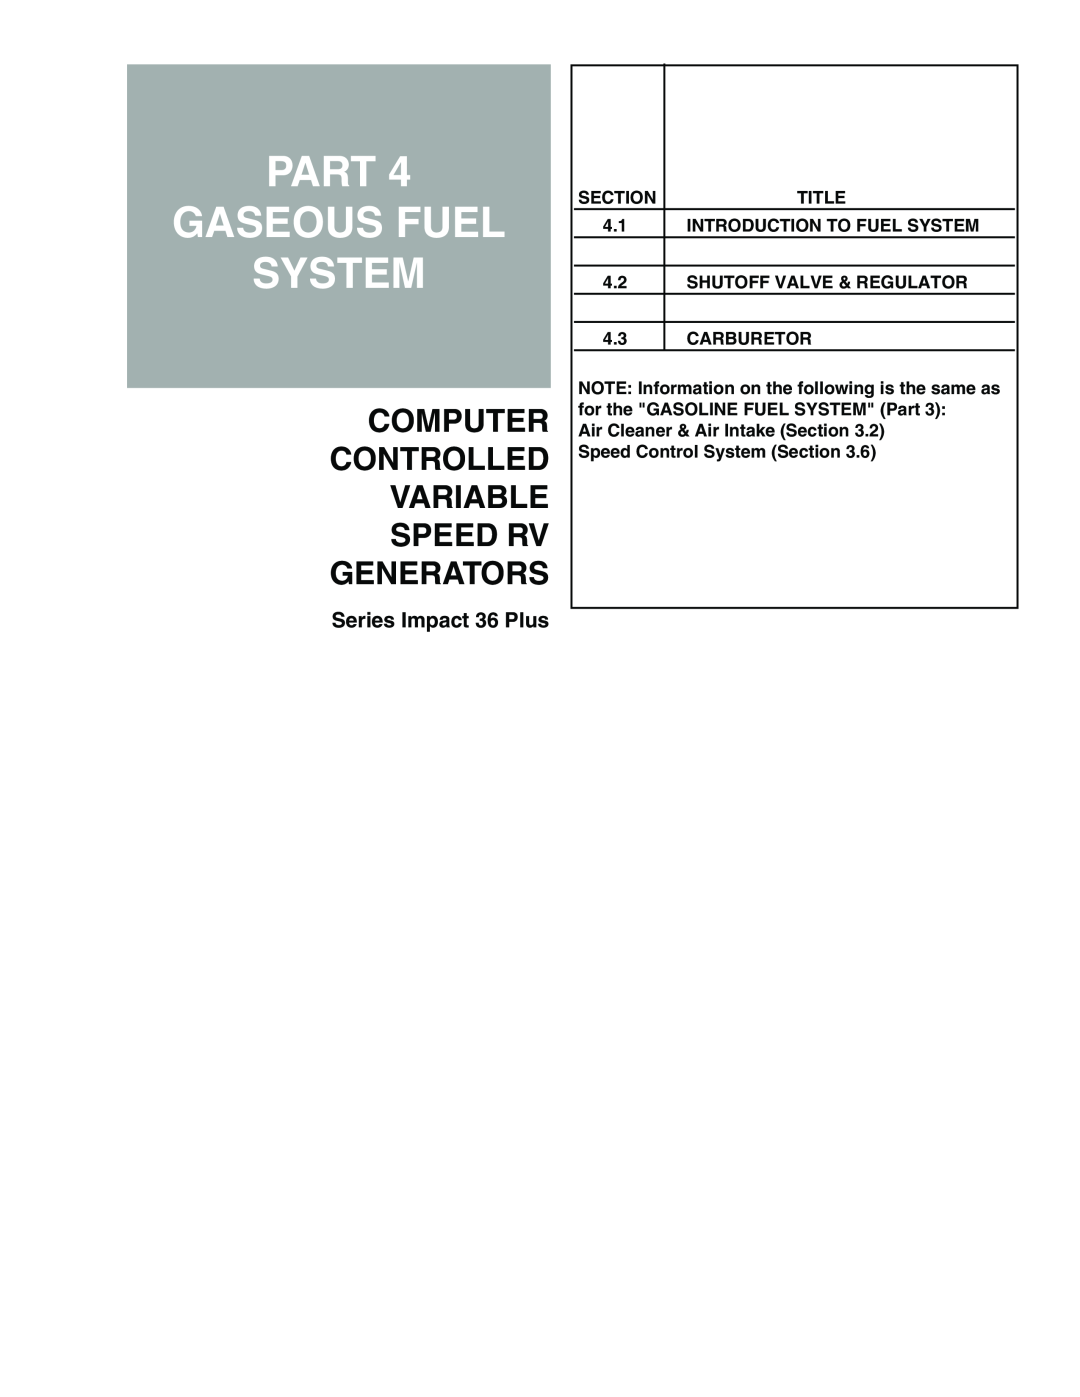 Generac Power Systems 941-2 Part Gaseous Fuel System, INTRODUCTION TO FUEL SYSTEM 4.2 SHUTOFF VALVE & REGULATOR, Section 